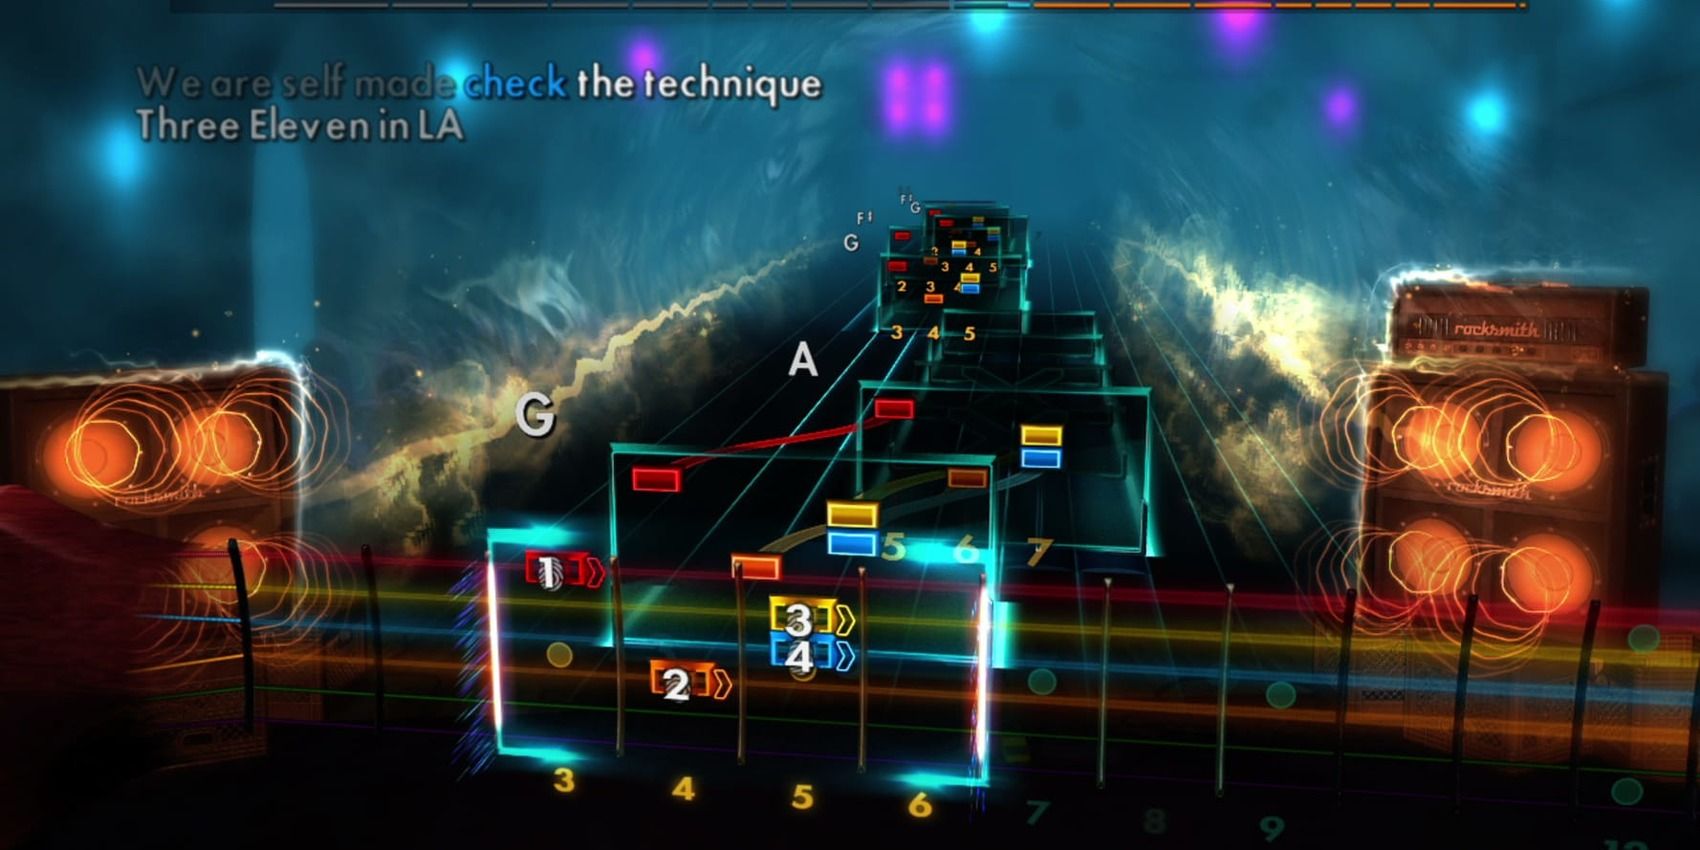 Notes fly across the screen in the 2014 version of Rocksmith